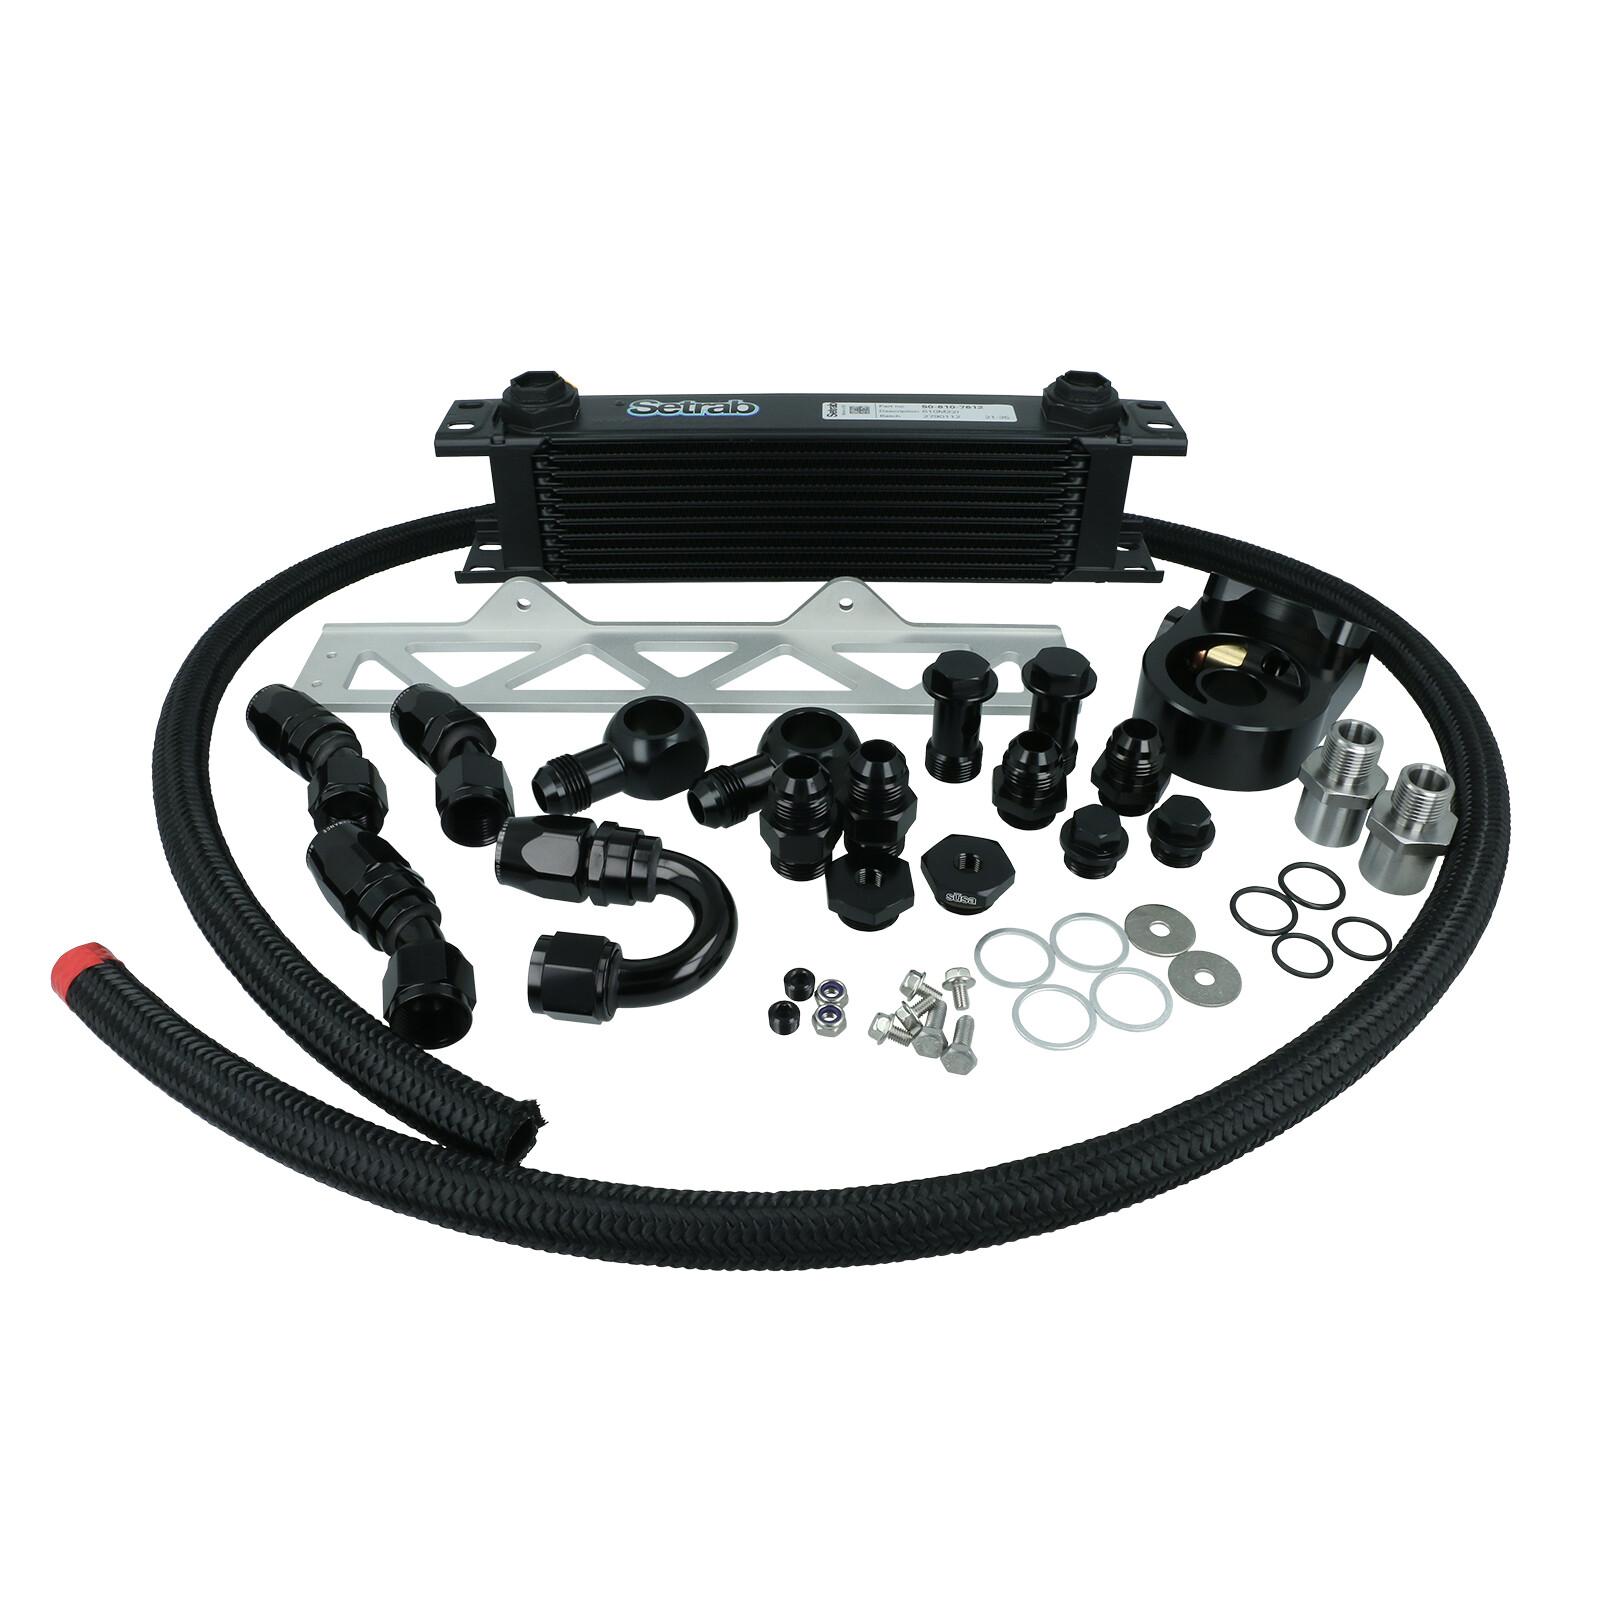 Toyota Yaris GR Oil Cooler Upgrade kit with Thermostat